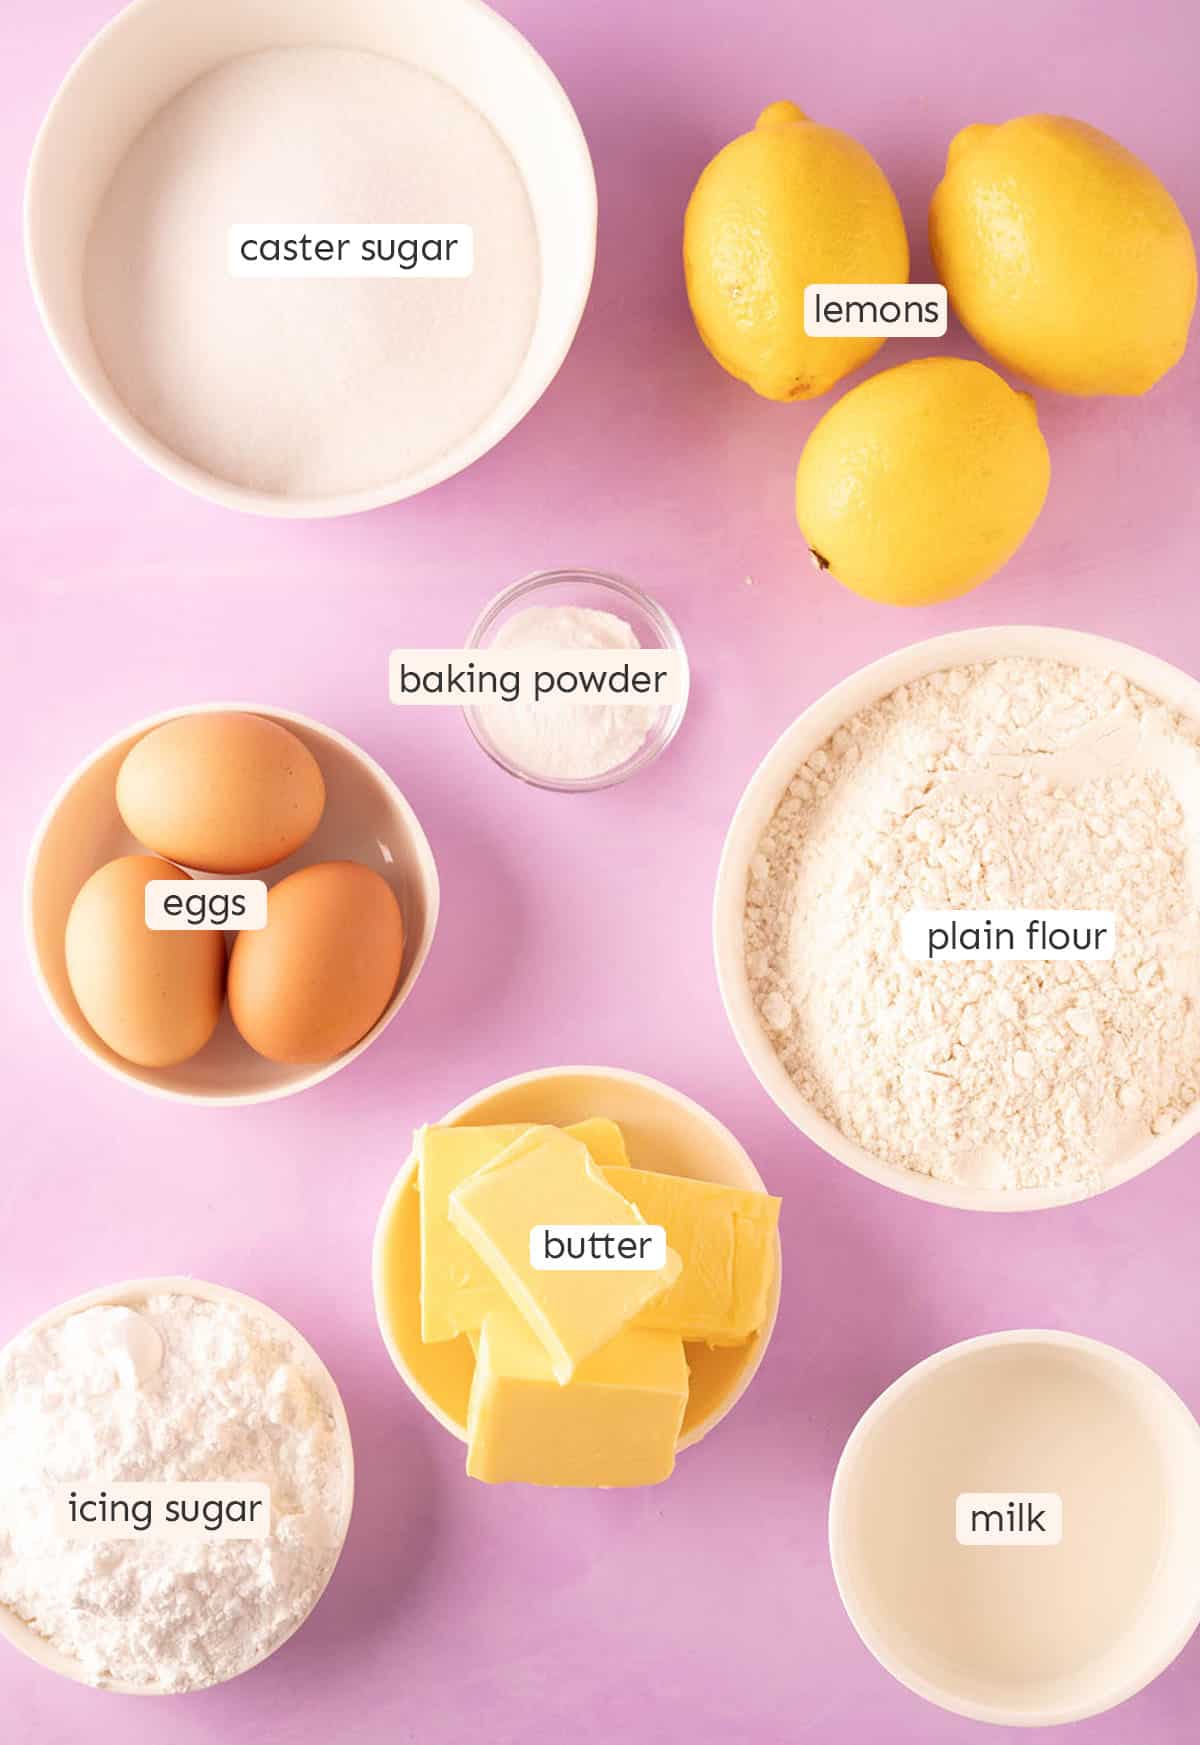 All the ingredients needed to make Lemon Pound Cake from scratch. 